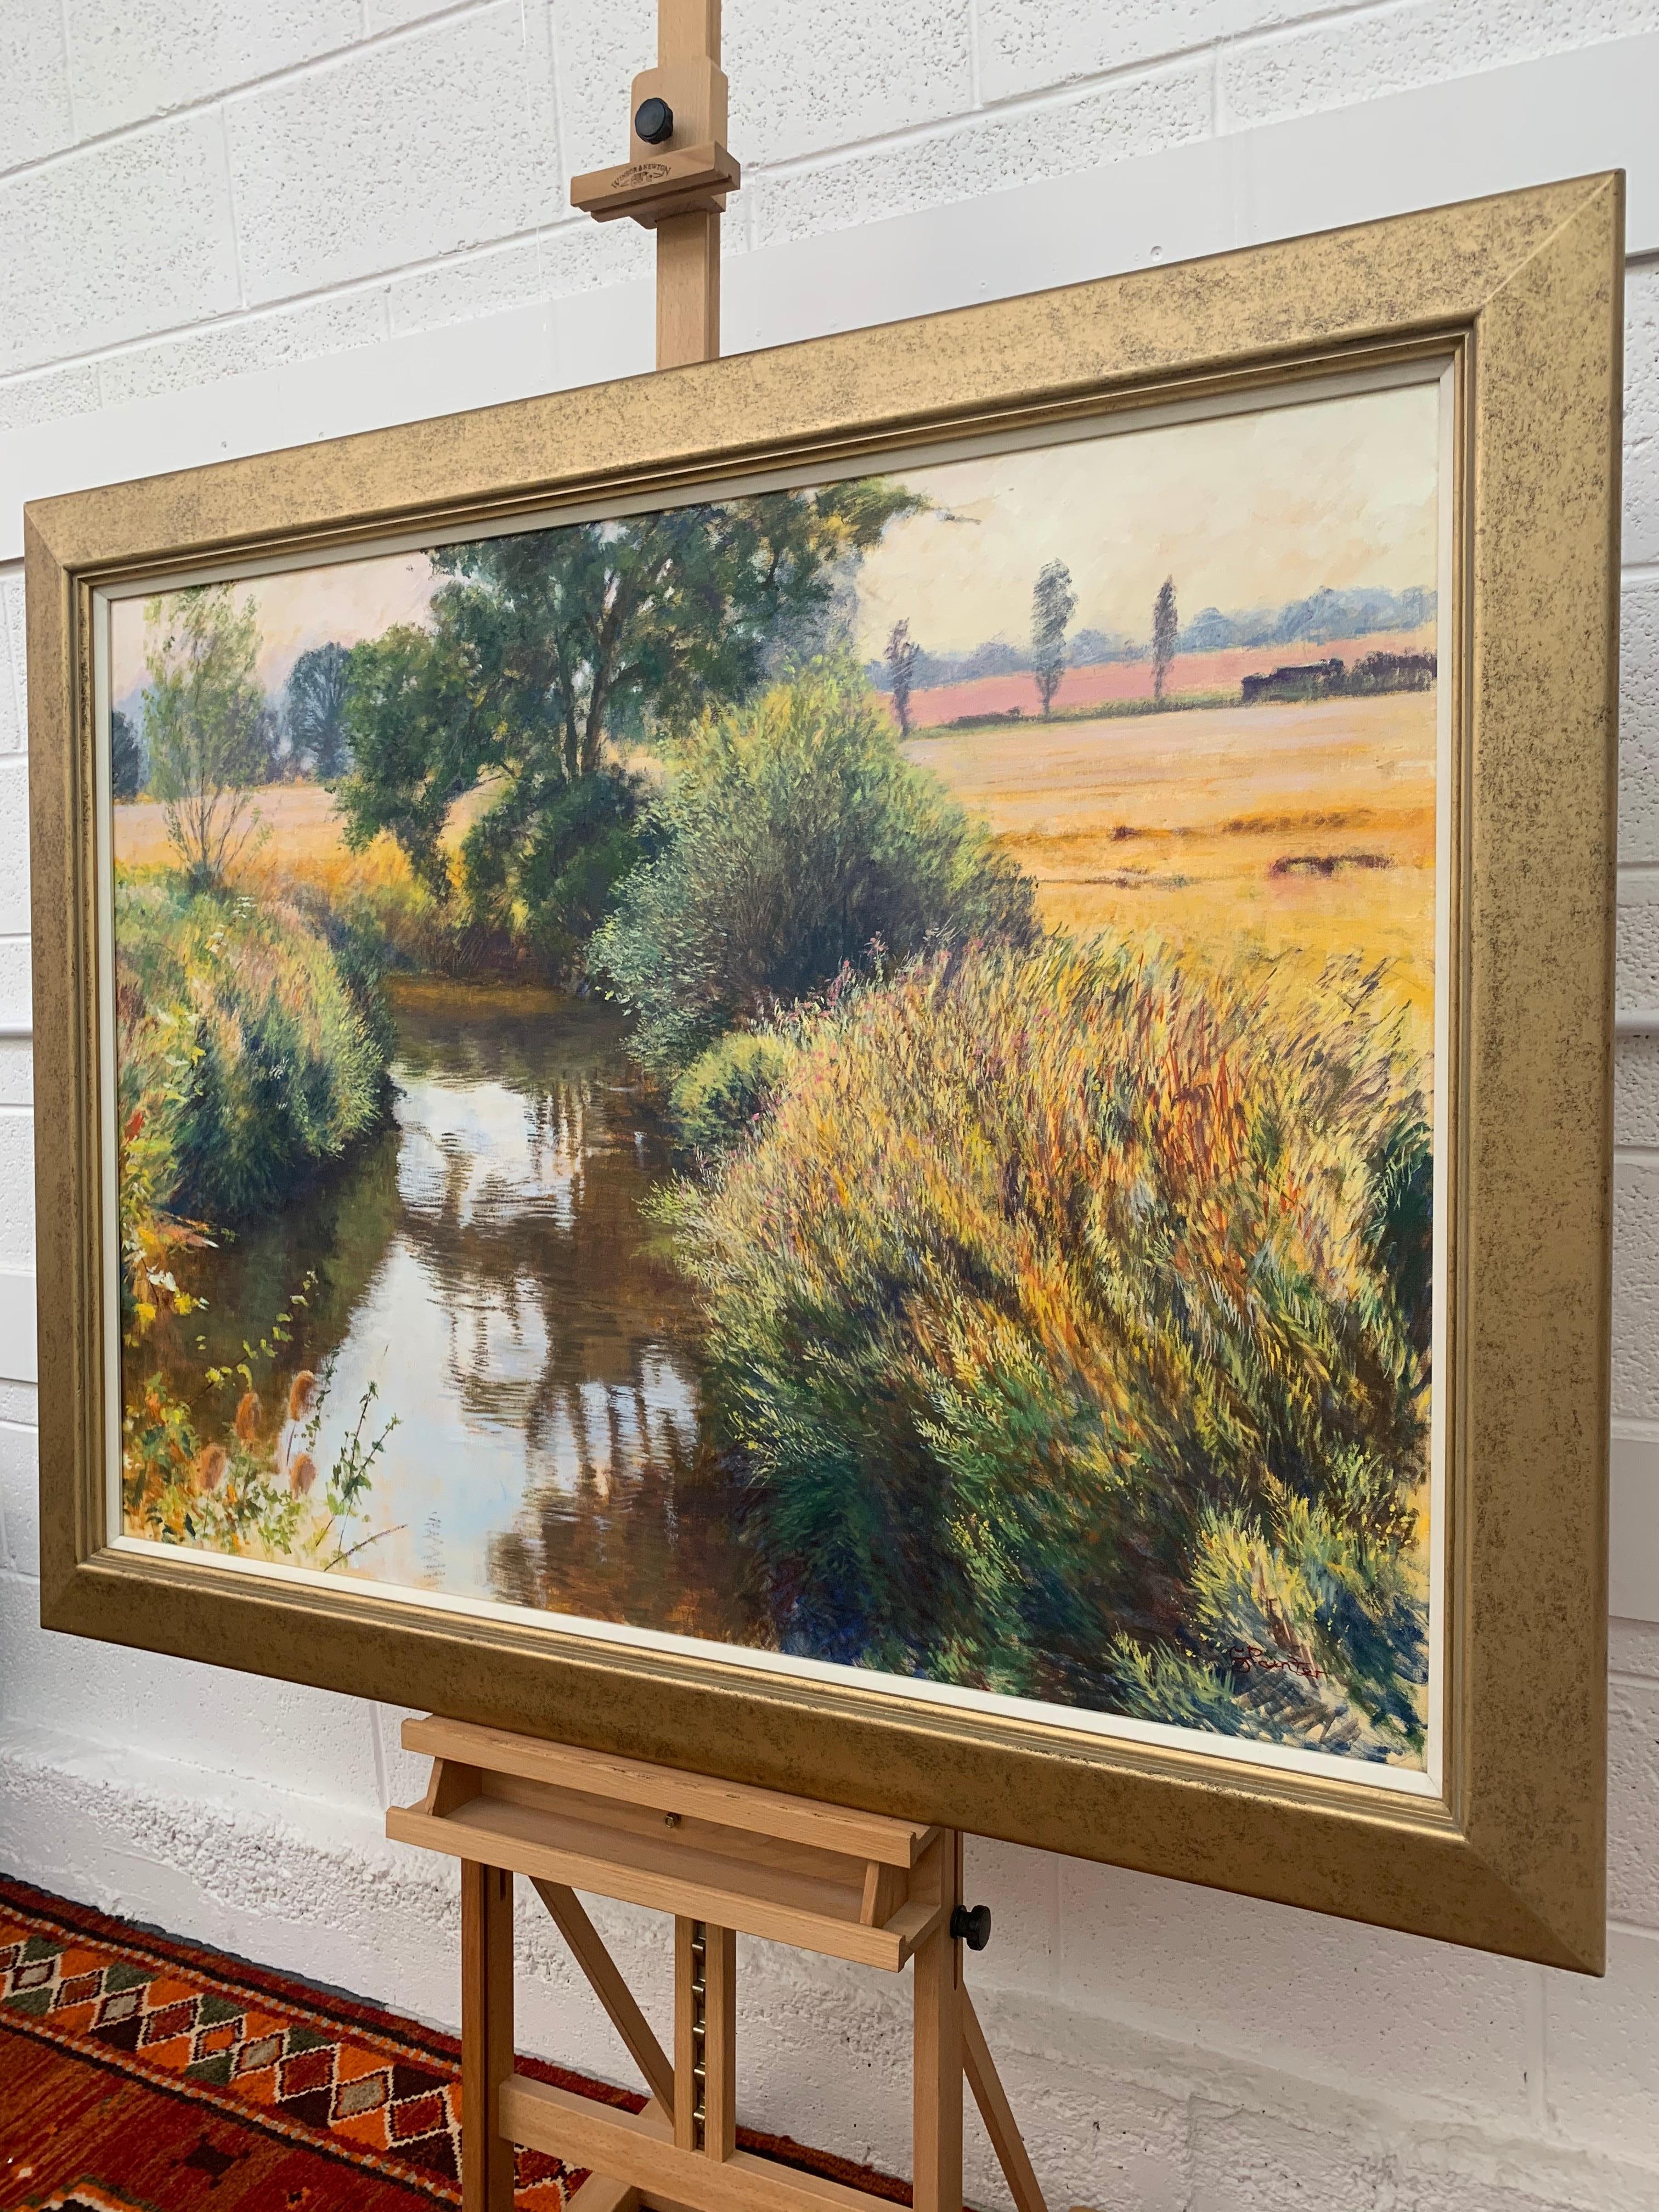 English Summer Stream River Landscape Original Oil Painting by Artist Graham Painter (British 20th Century, 1947-2007).
Country Stream, Oil on Canvas, framed in a high quality gold moulding.

Art measures 49.5 x 35.5 inches
Frame measures 57 x 43